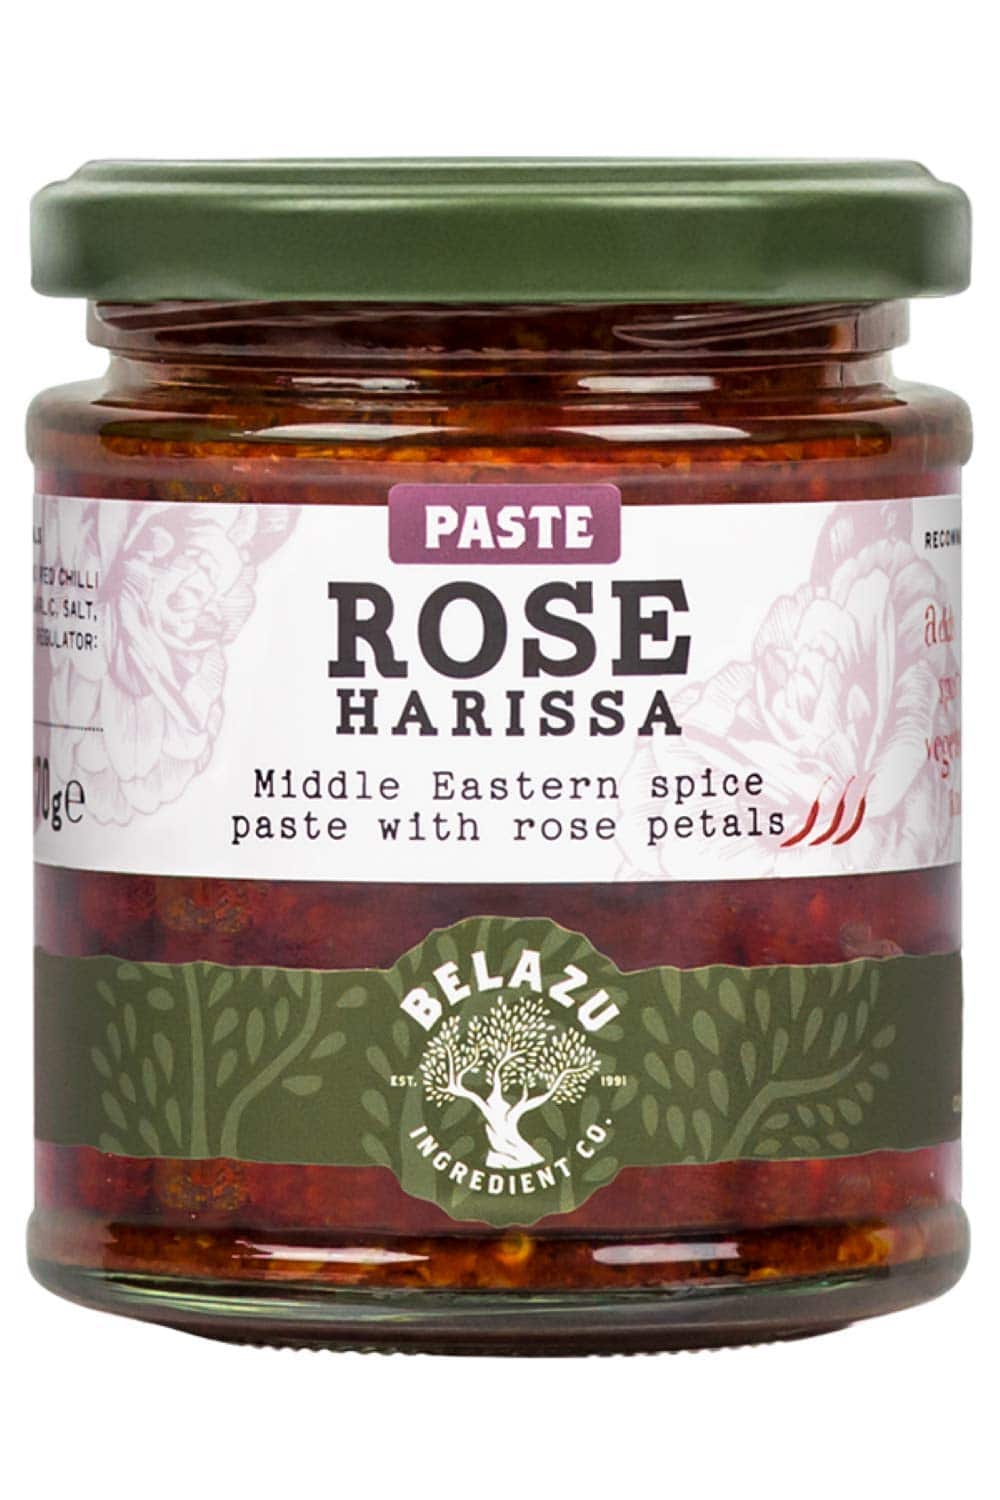 food-gifts-for-men-harissa